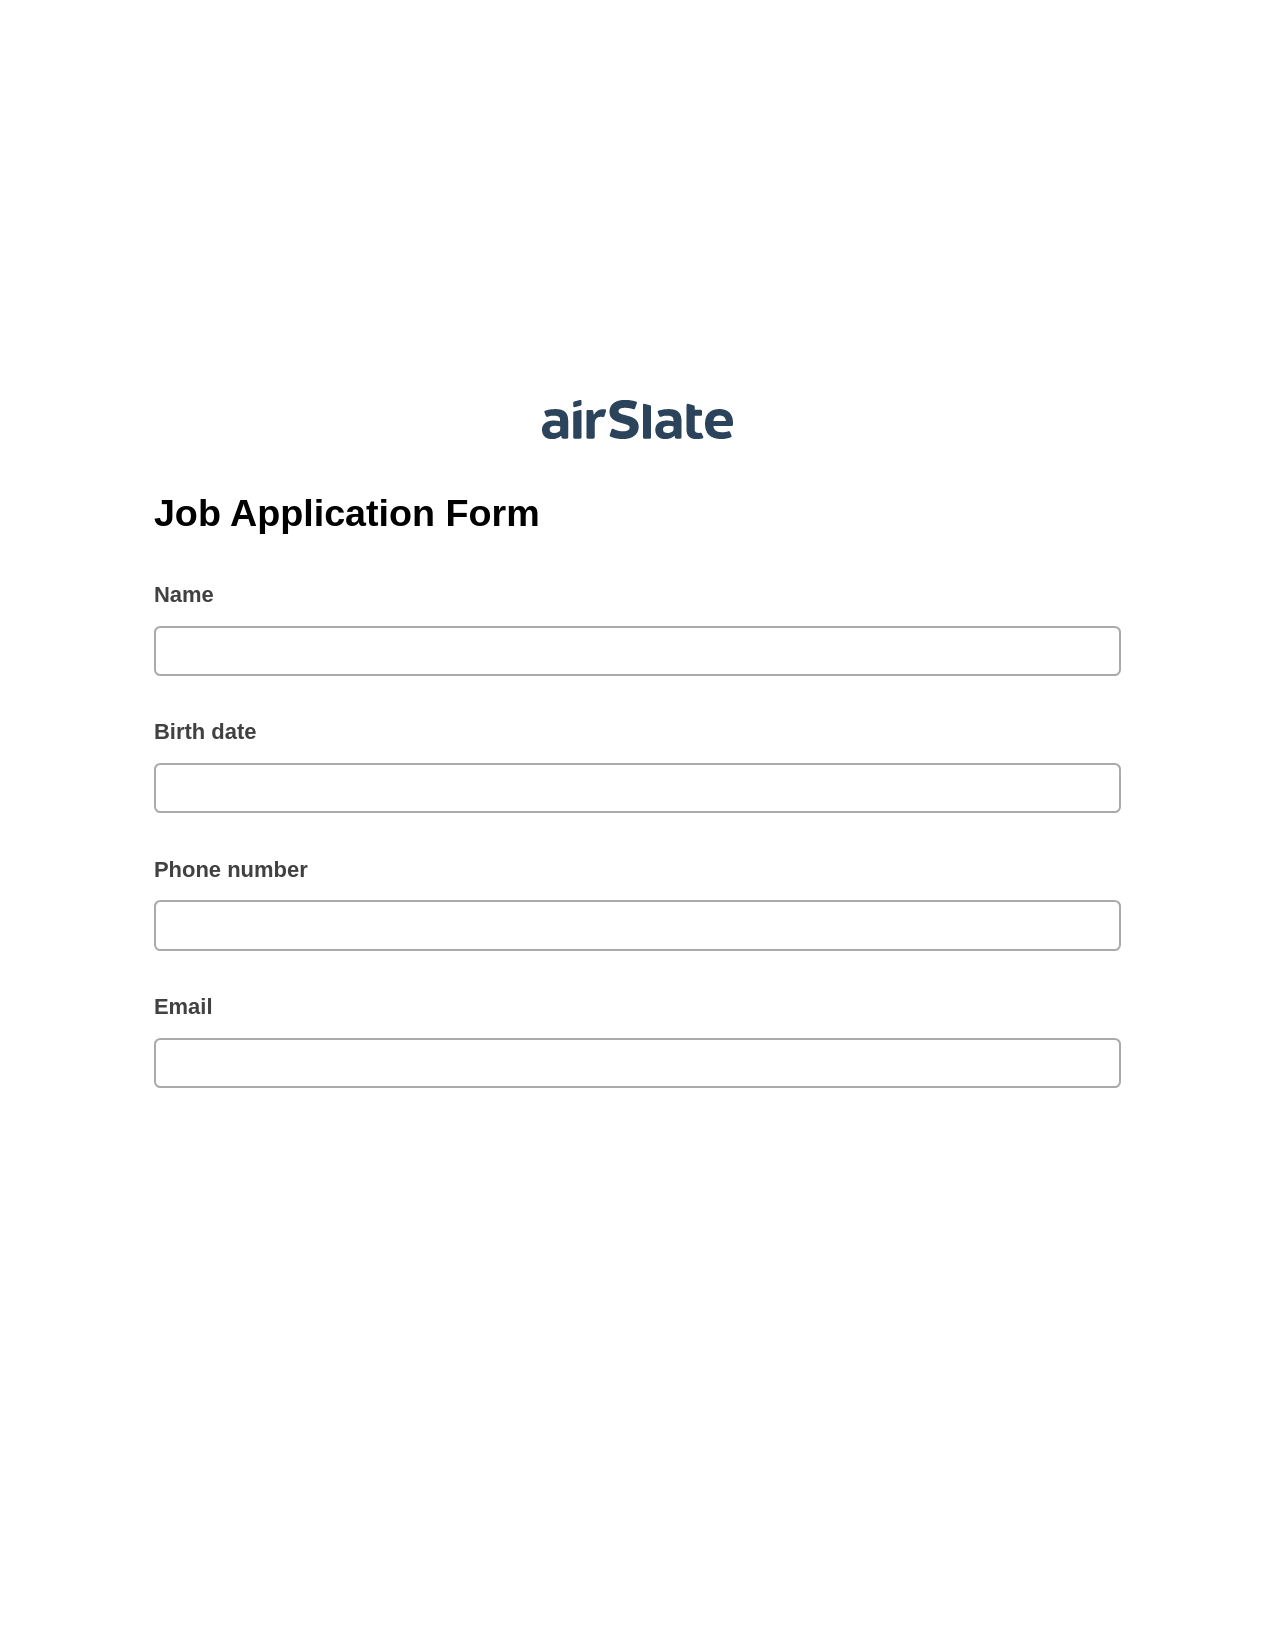 Job Application Form Pre-fill Slate from MS Dynamics 365 Records Bot, System Bot - Create a Slate in another Flow, Webhook Postfinish Bot